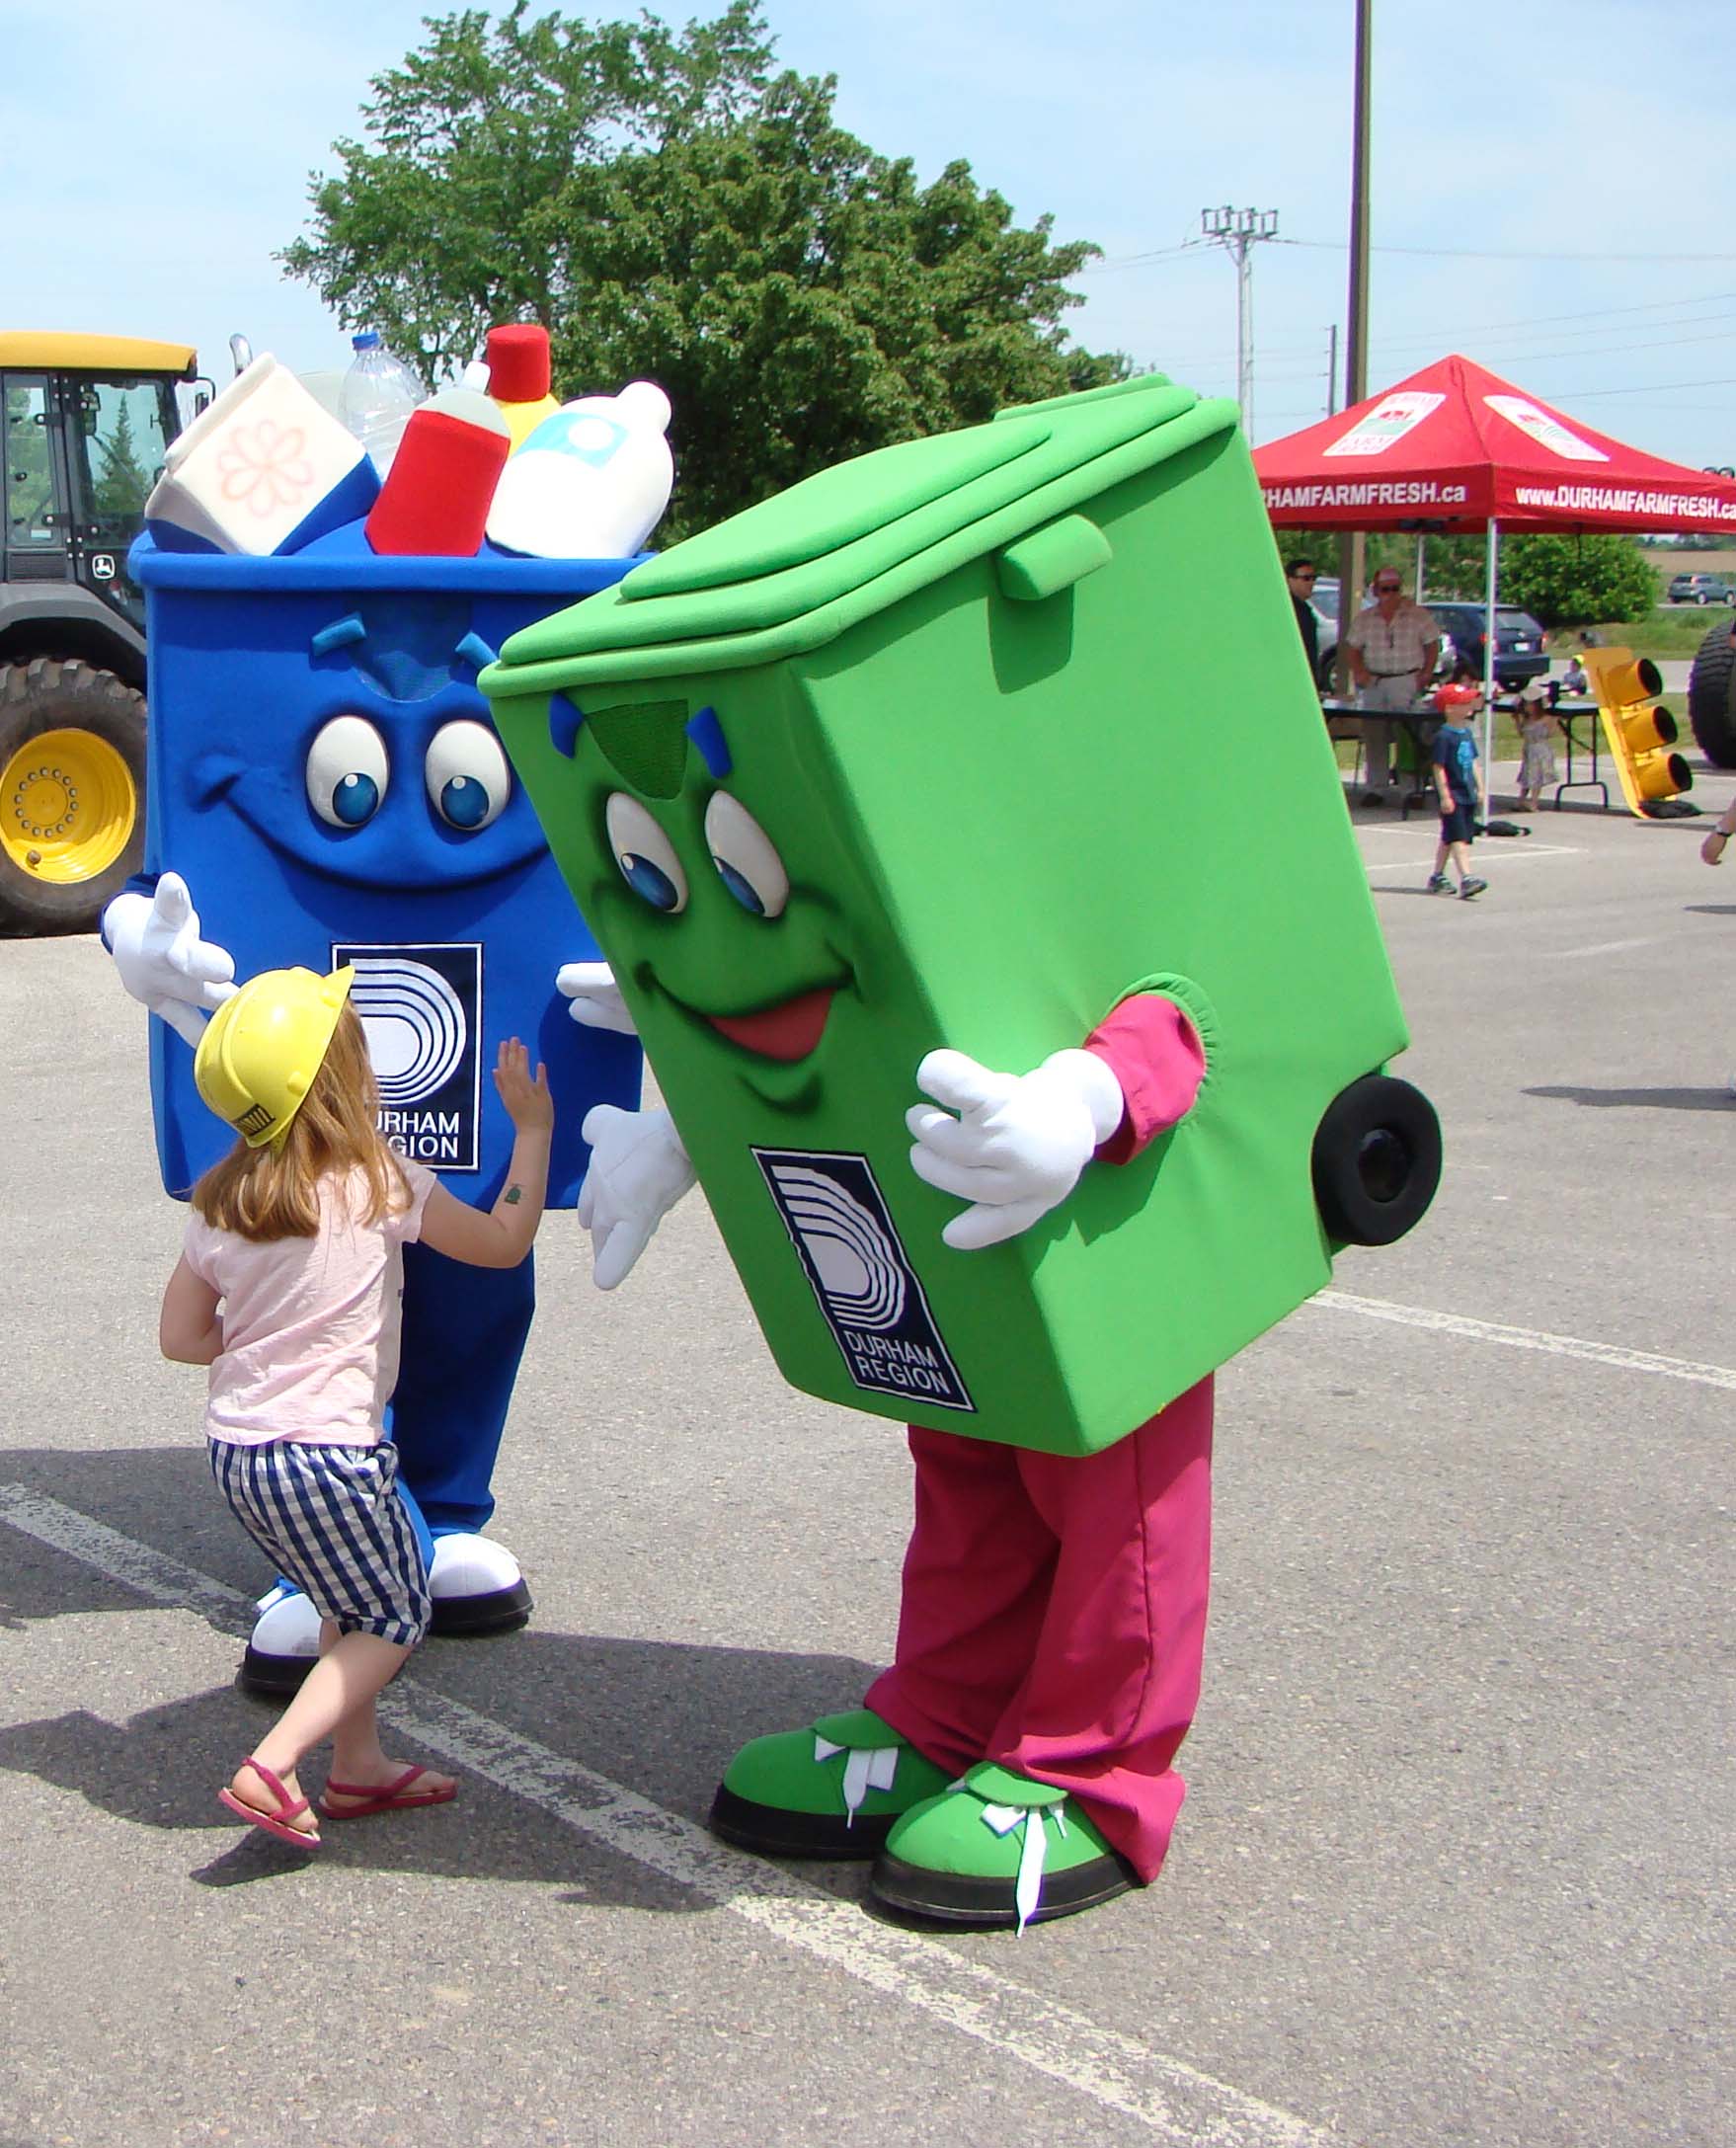 A photograph of a child with mascot recycling and green waste bins